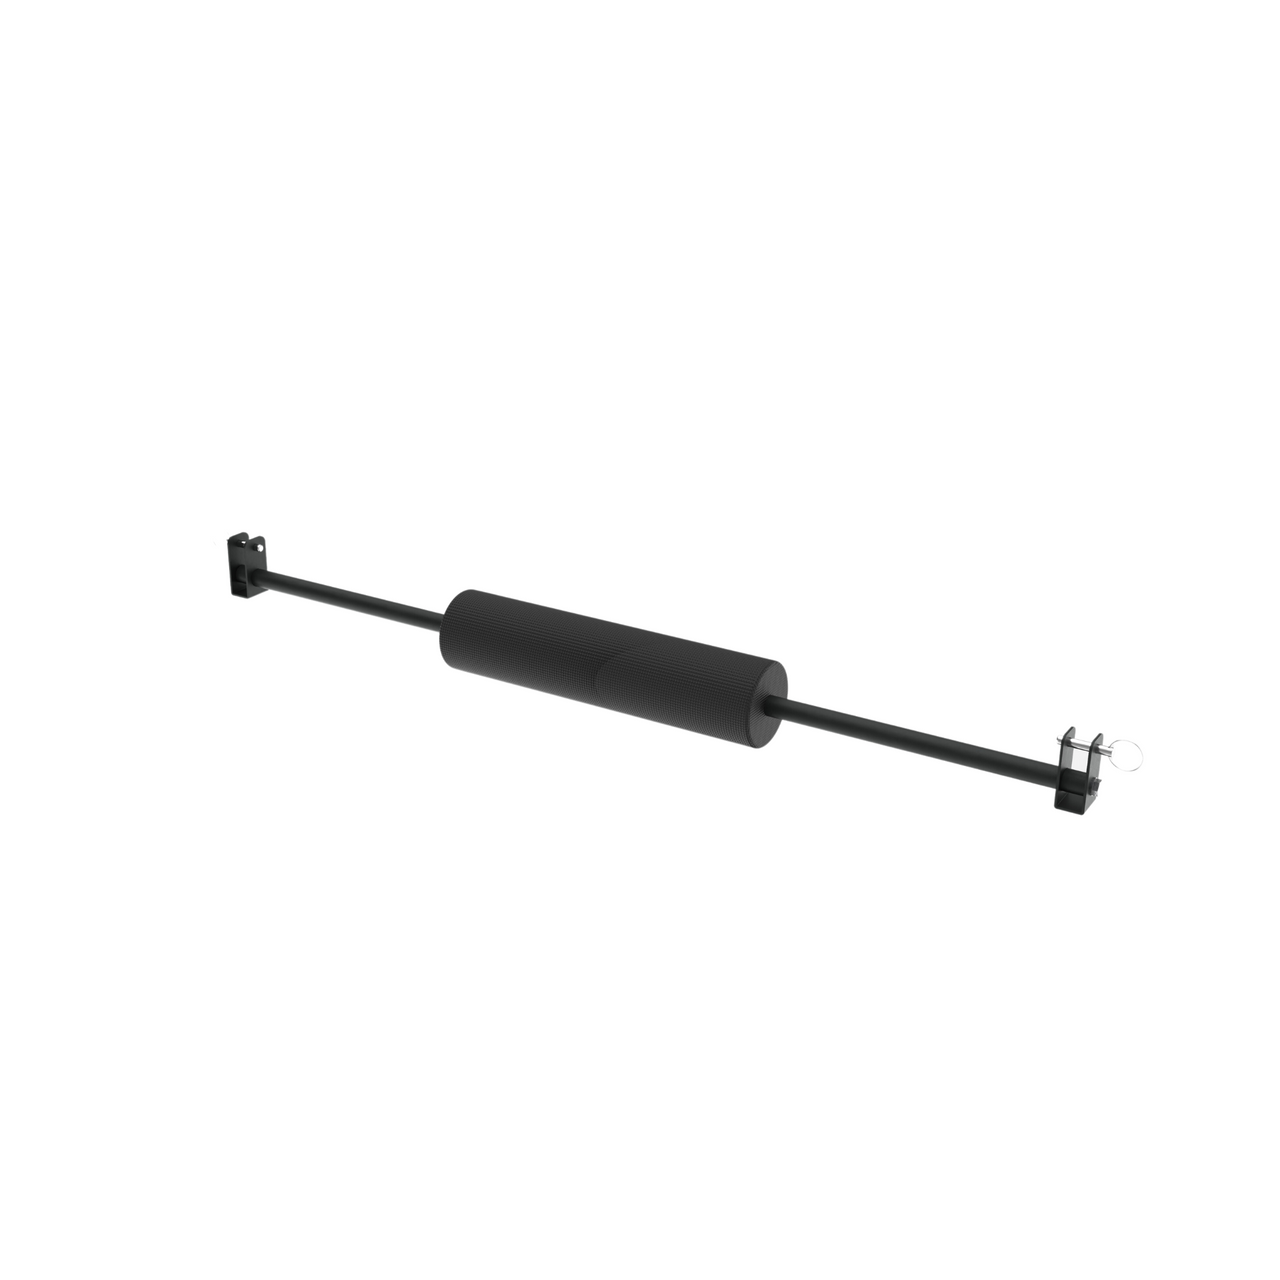 VULCAN Leg Roller Attachment for Home Gym Power Rack | IN STOCK